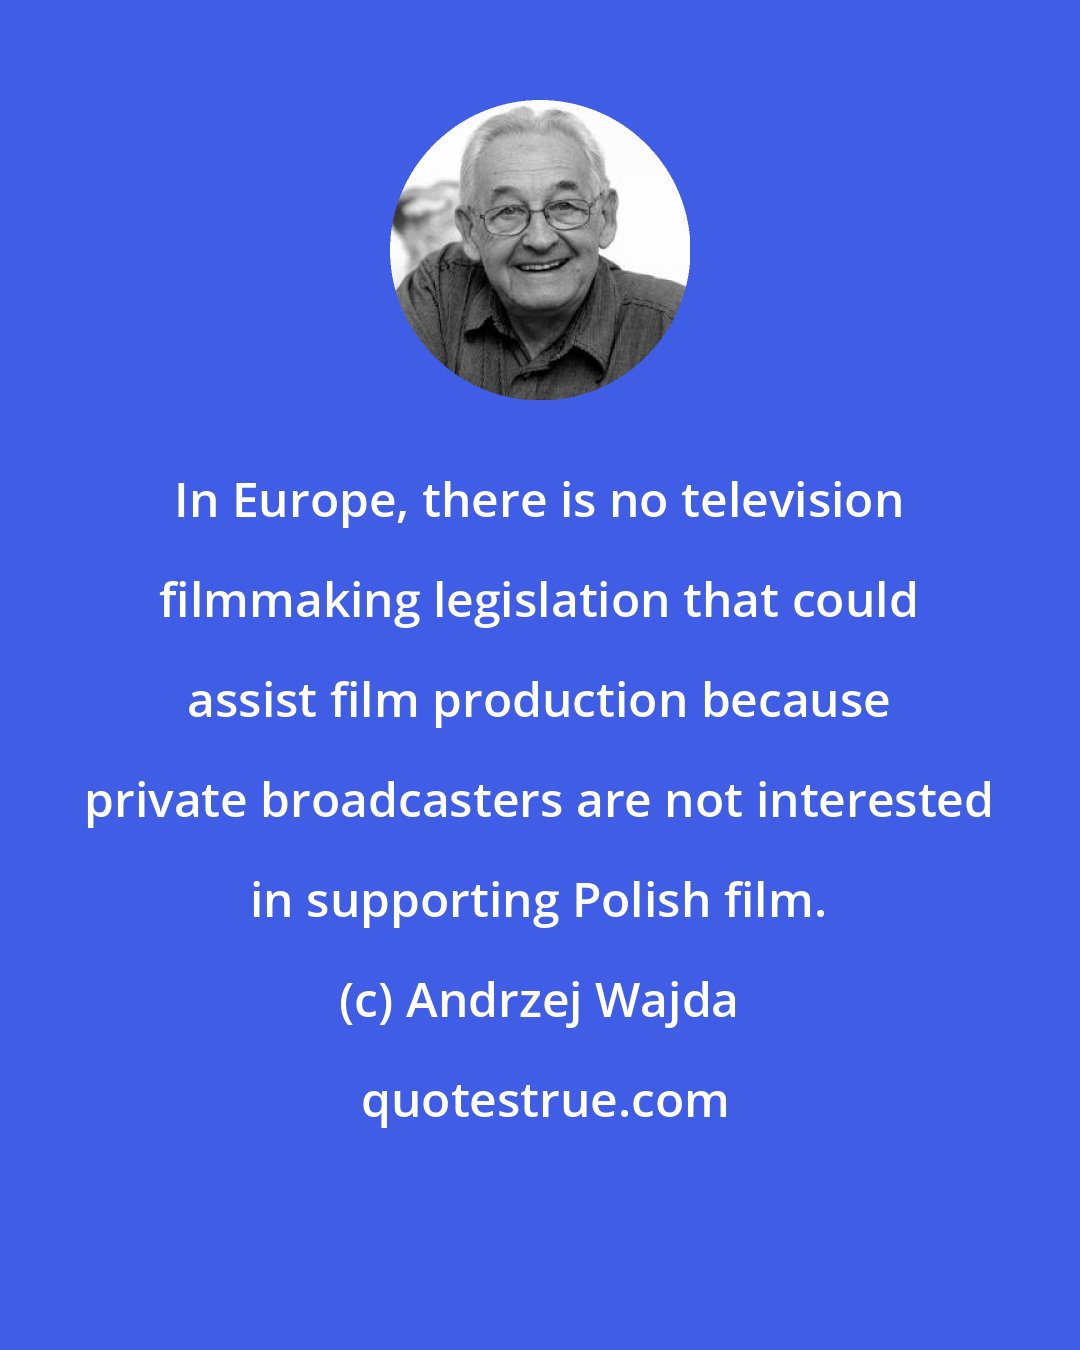 Andrzej Wajda: In Europe, there is no television filmmaking legislation that could assist film production because private broadcasters are not interested in supporting Polish film.